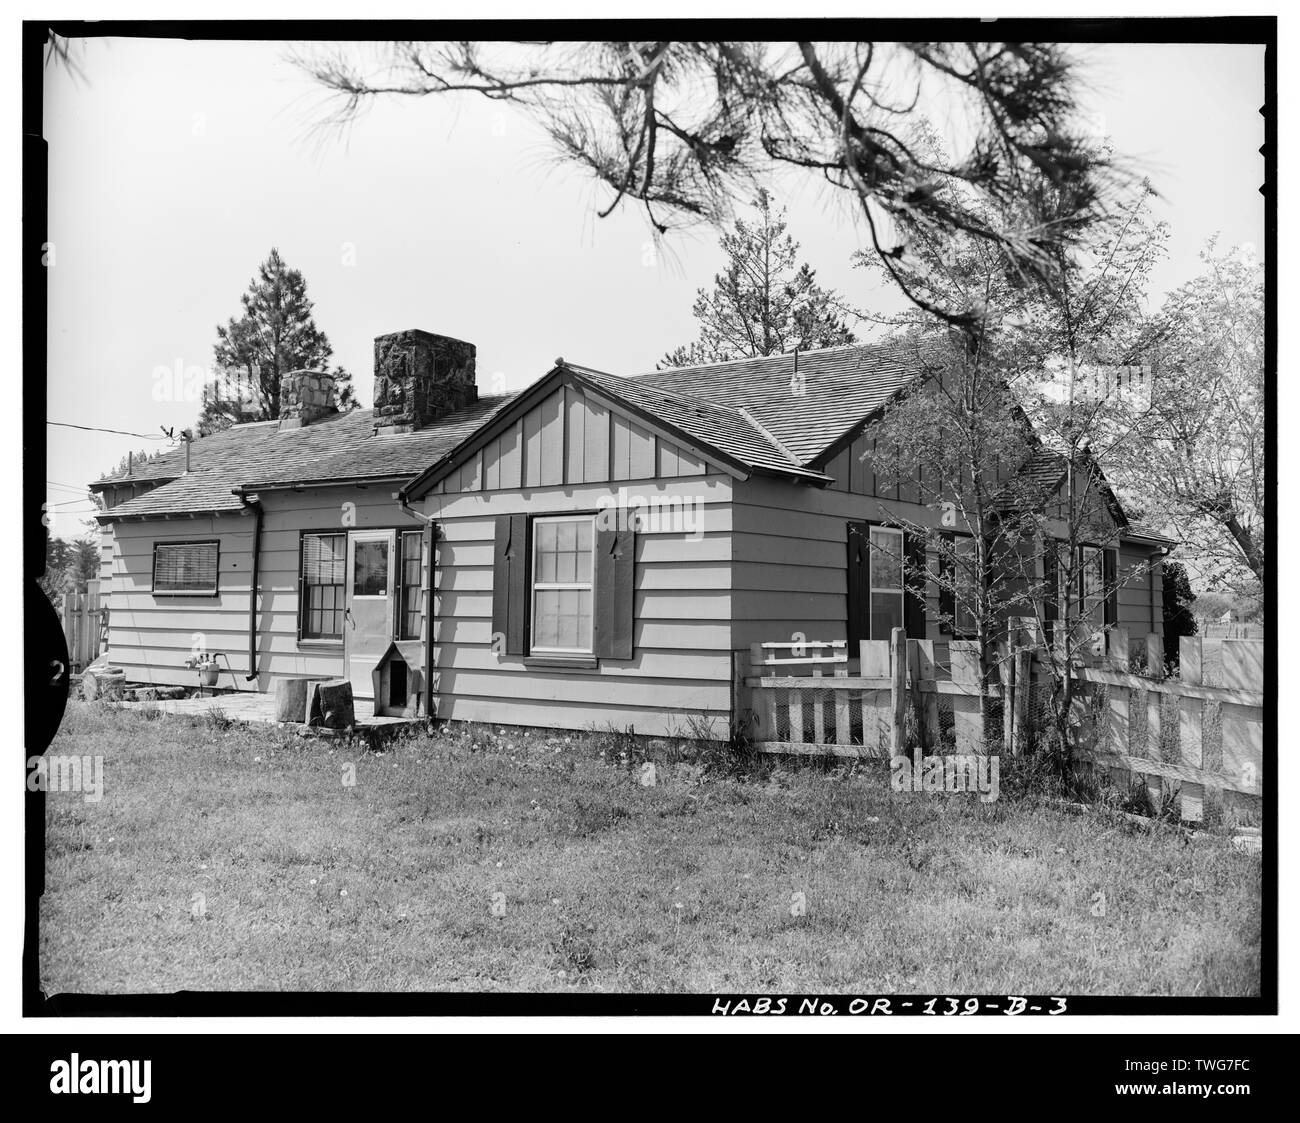 RANGERS RESIDENCE, NORTHEAST REAR AND NORTHWEST SIDE, LOOKING SOUTH - Union Ranger Distric Compound, Rangers Residence, Fronting State Highway 203, at West edge of Union, Union, Union County, OR Stock Photo